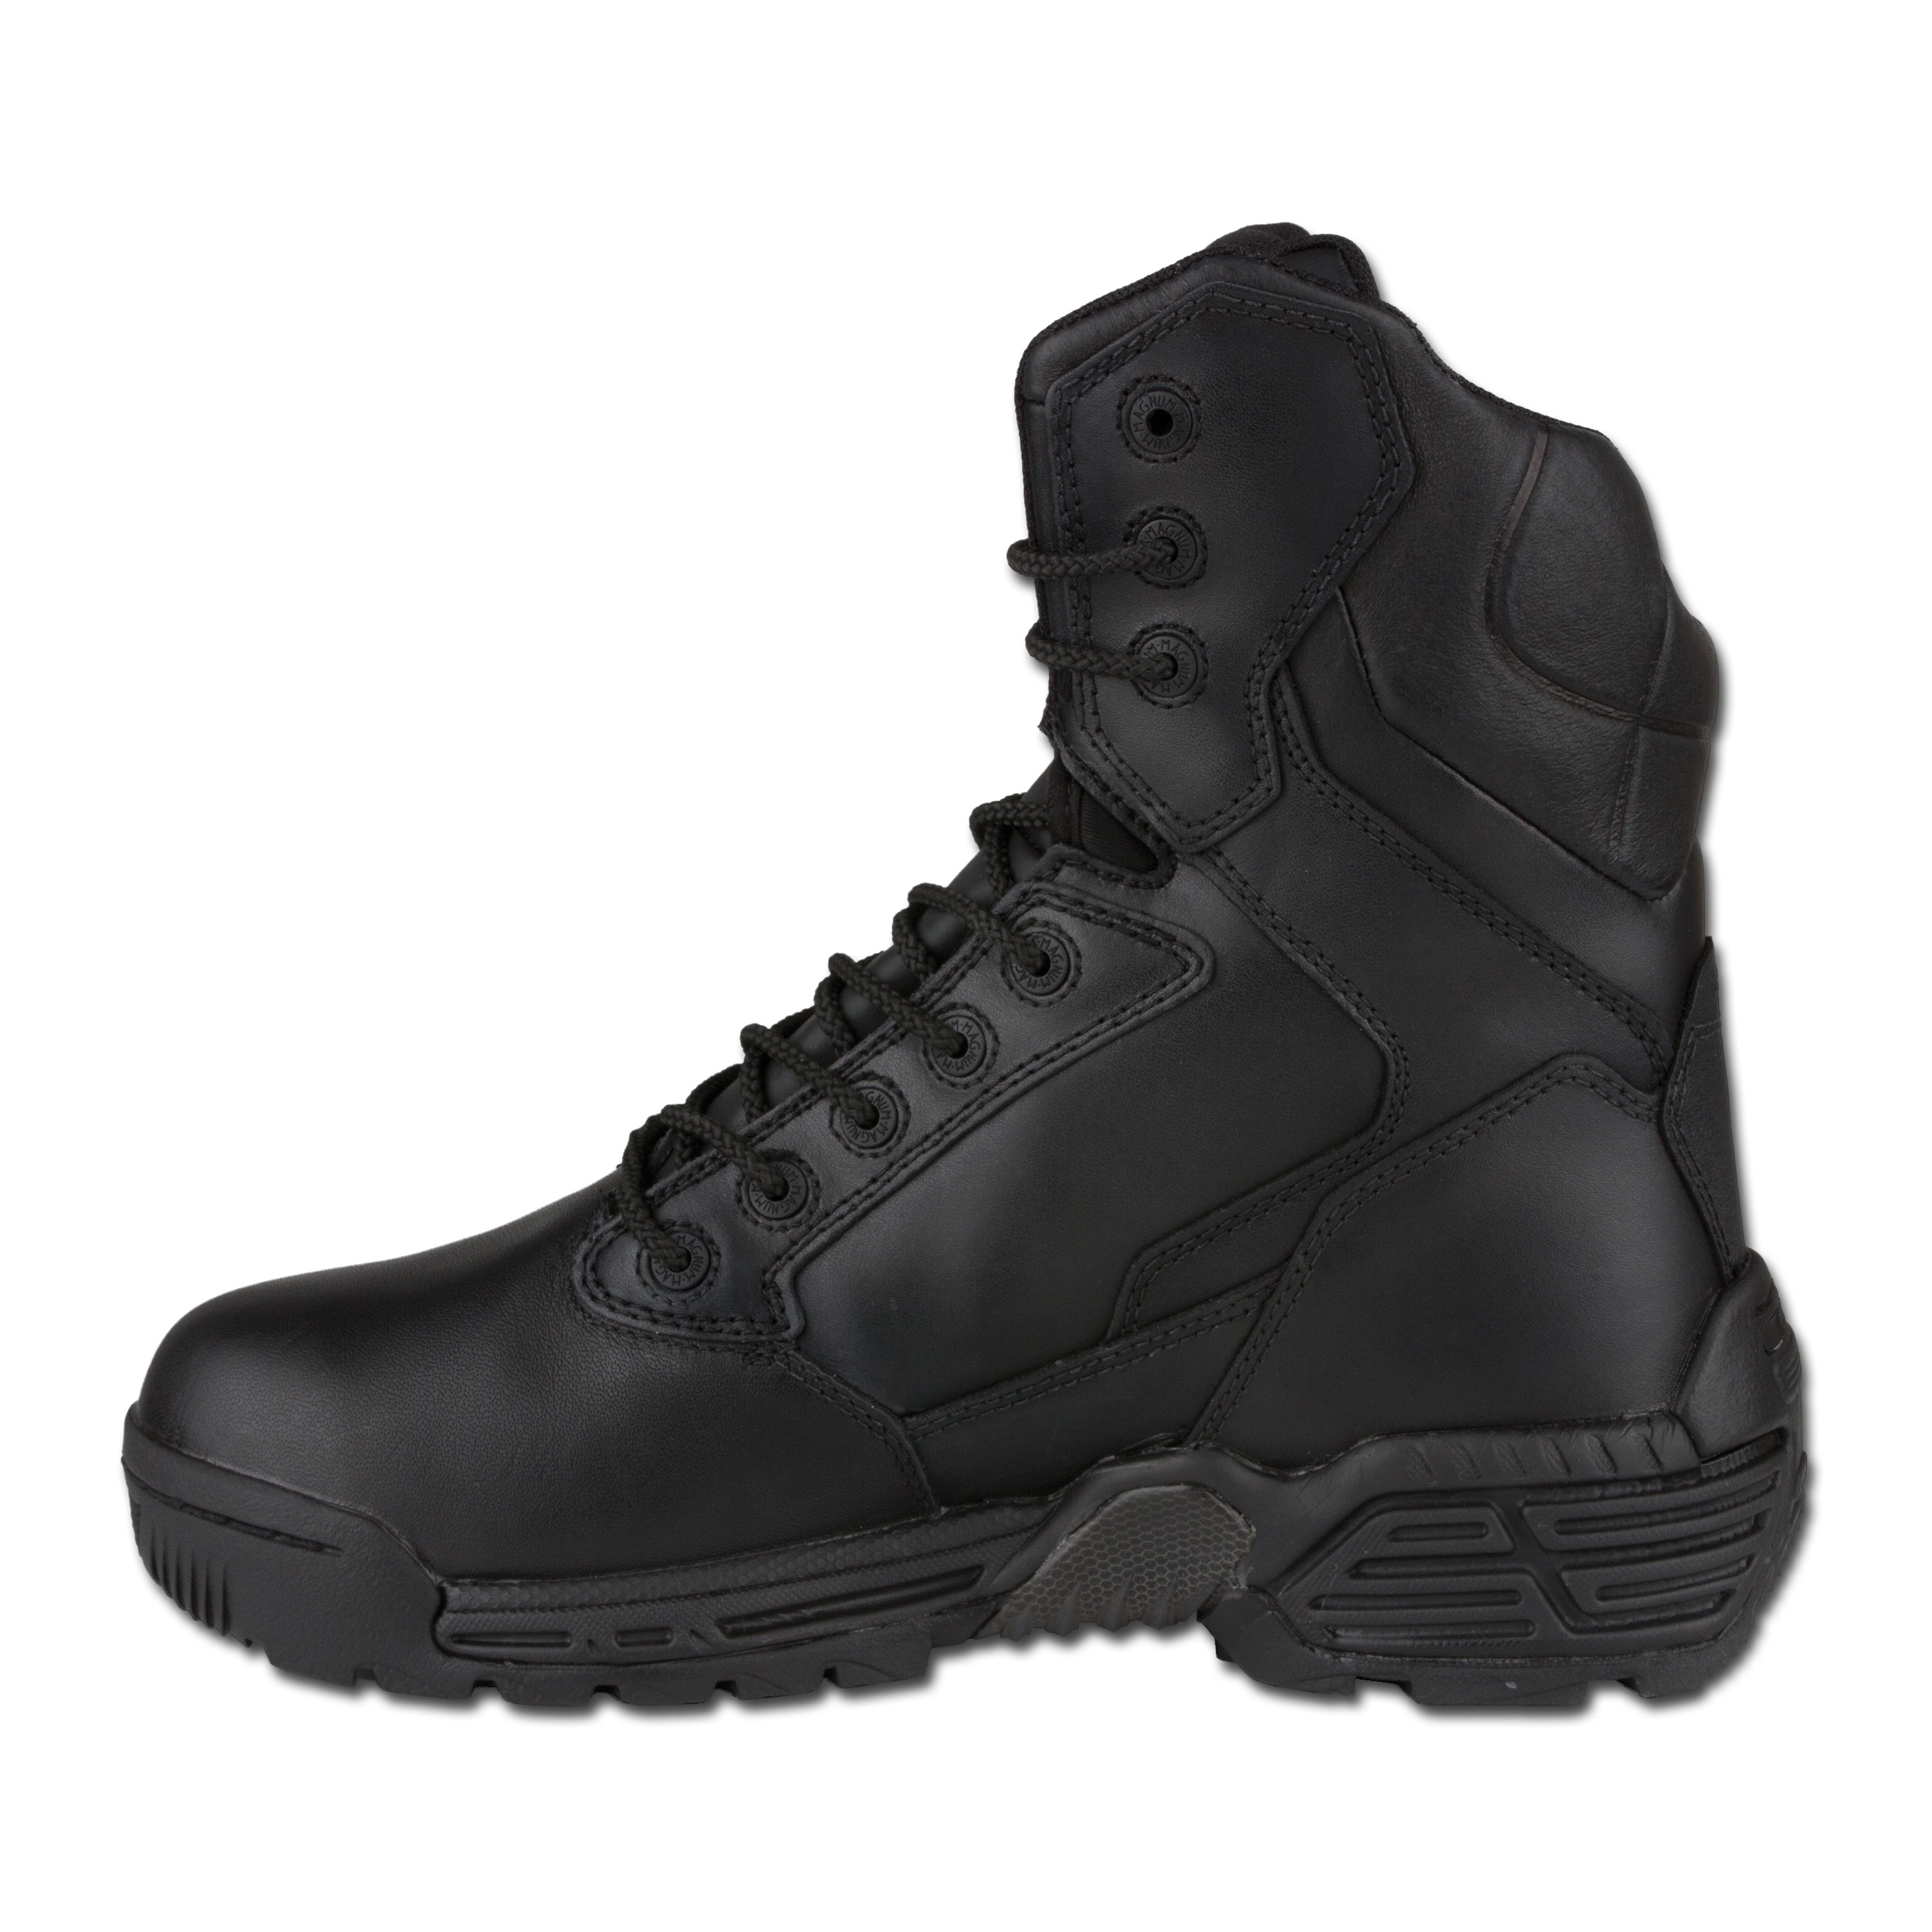 Boots Magnum HI-TEC Stealth Force Leather 8.0 waterproof | Boots Magnum ...